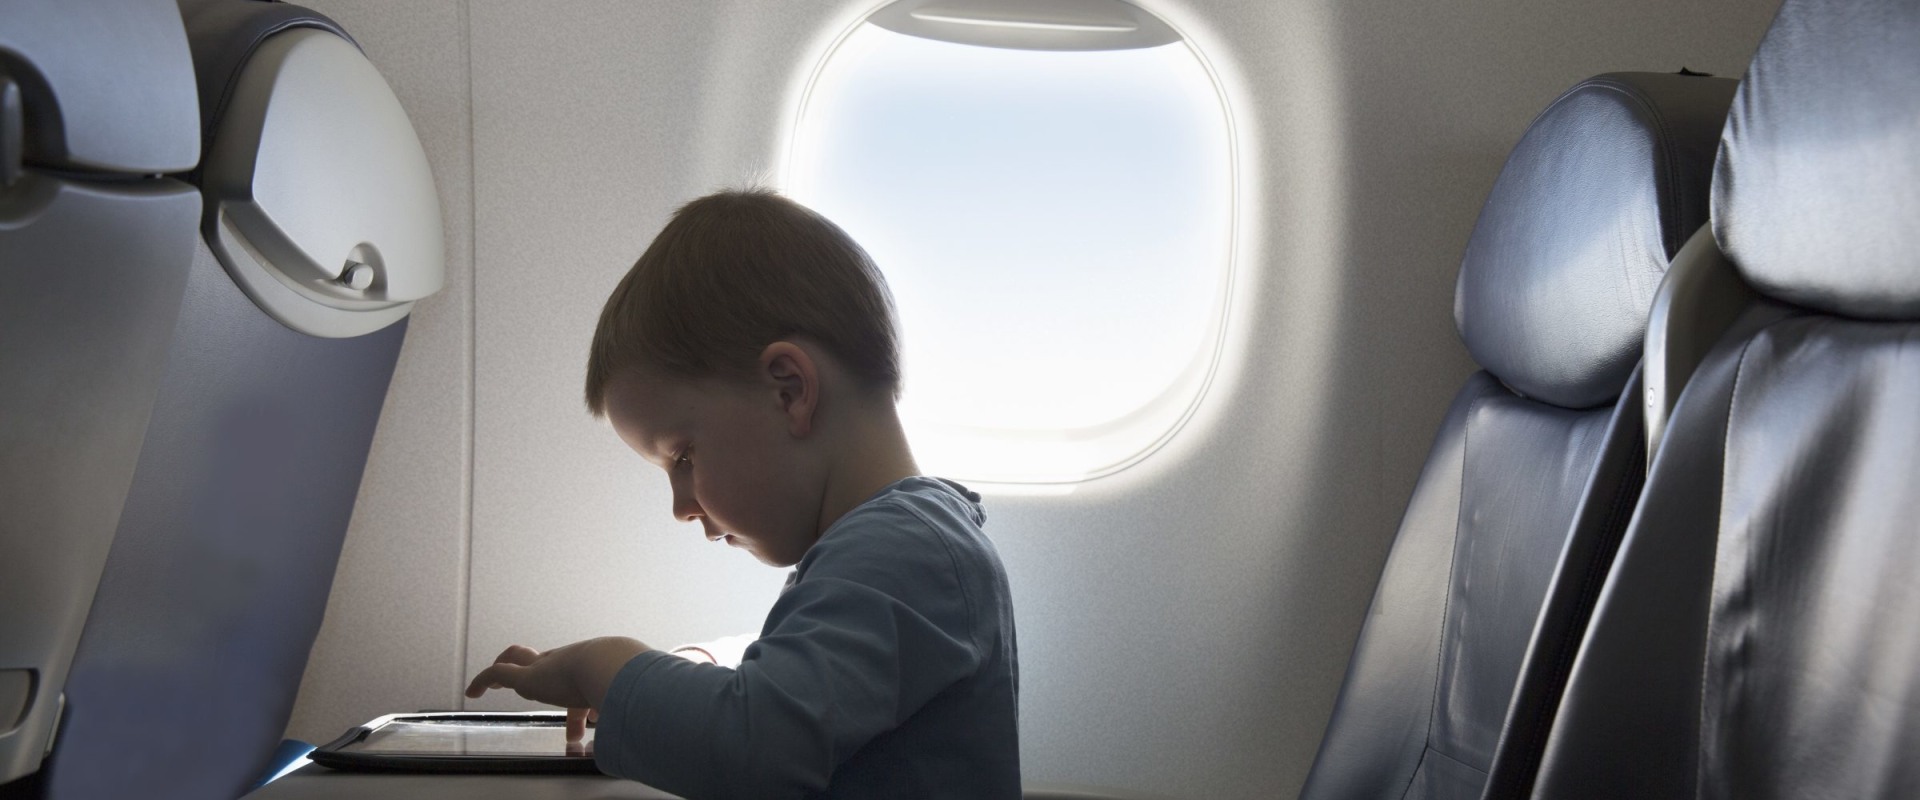 Entertainment Options on a Plane: Making the Most of Your In-Flight Experience